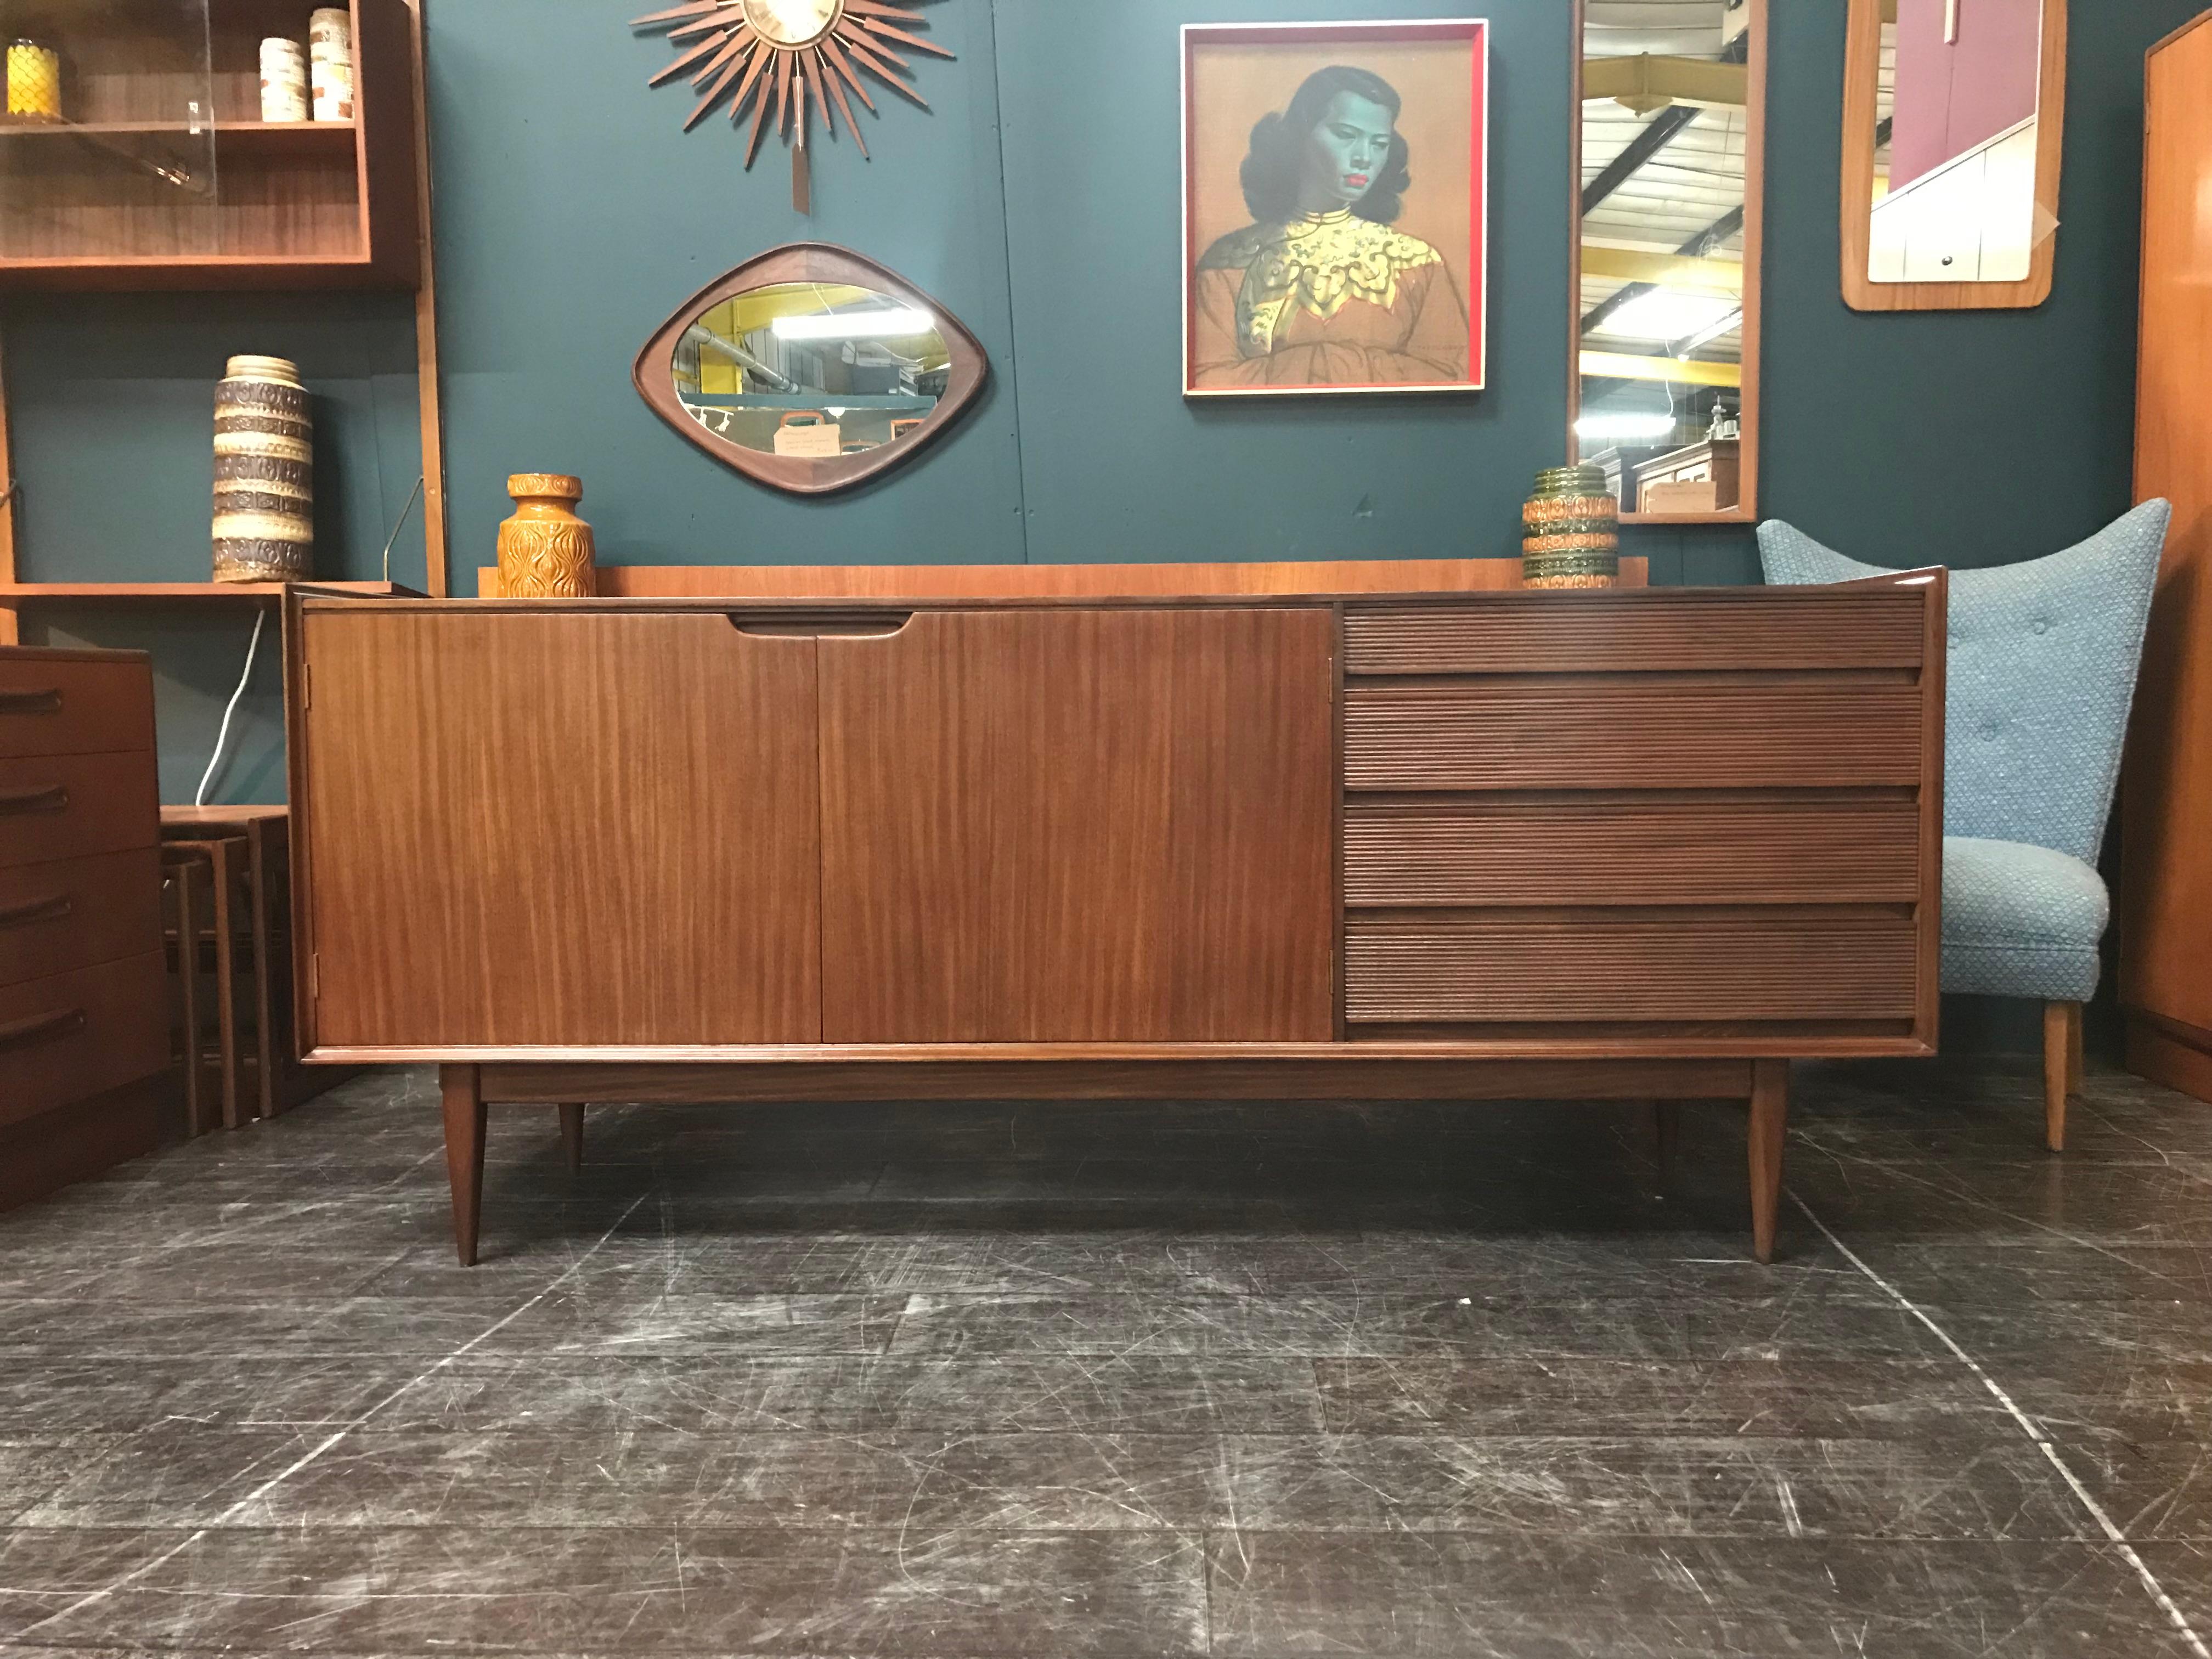 This midcentury sideboard was designed by Richard Hornby and manufactured by Fyne Ladye during the 1960s. It’s a finely crafted, high quality credenza made from solid afrormosia, which makes it unusually heavy. The sideboard features four drawers